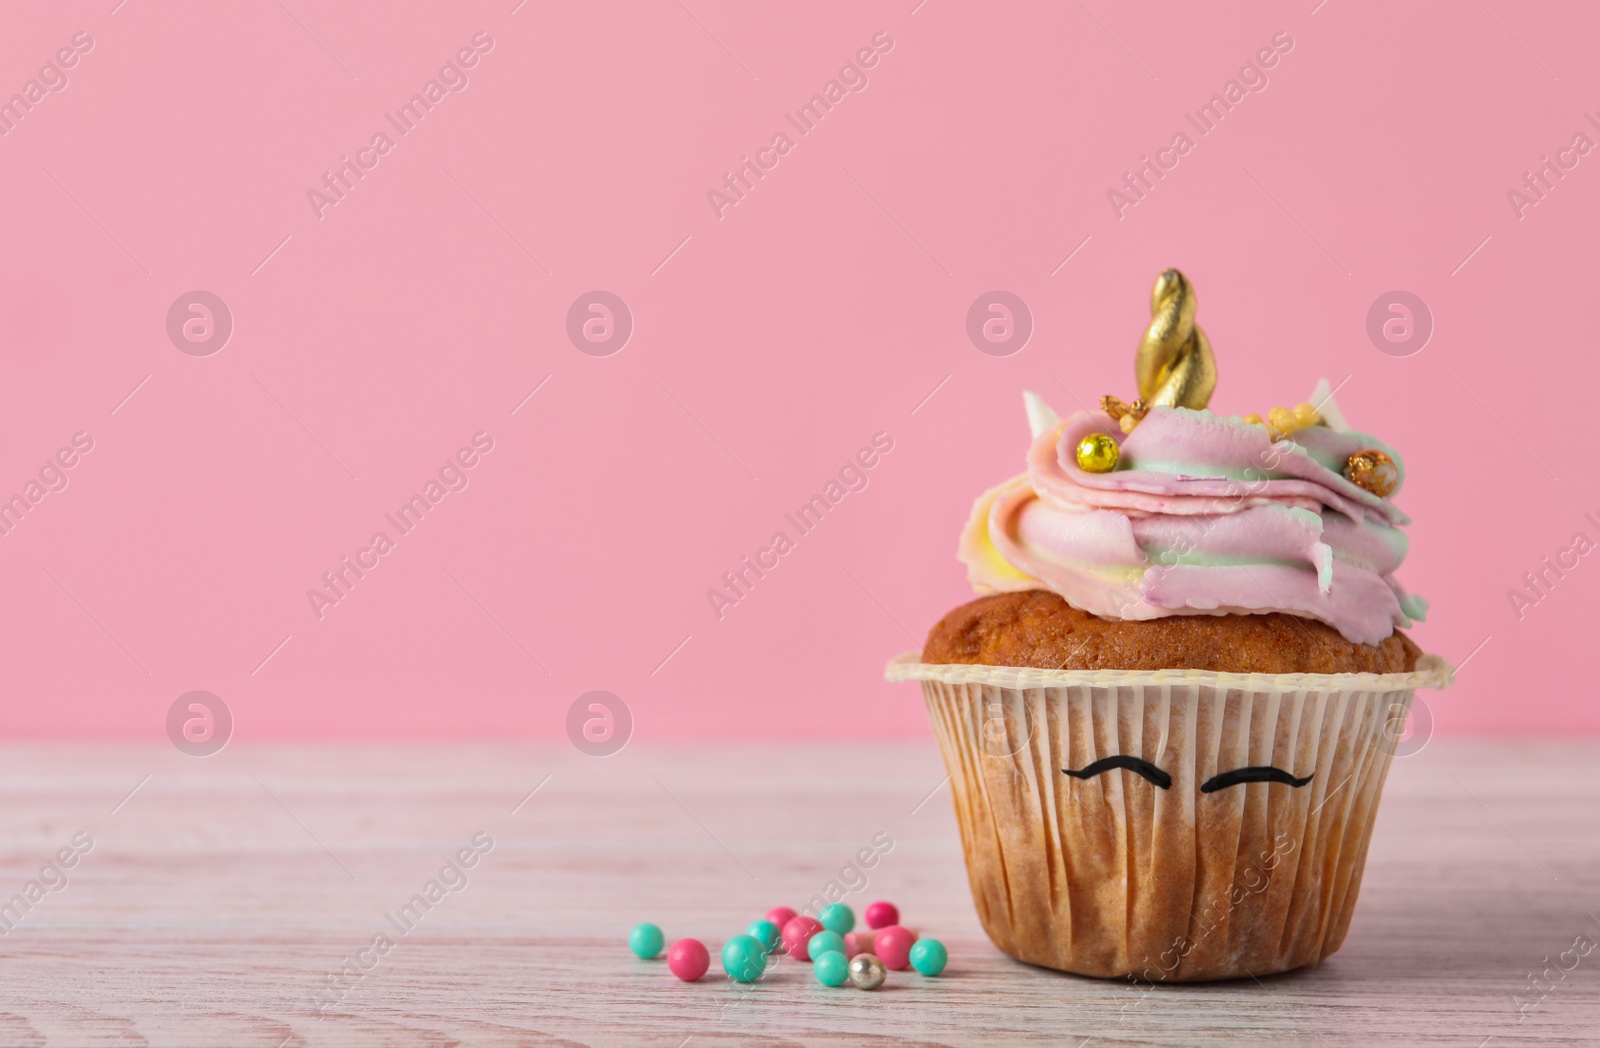 Photo of Cute sweet unicorn cupcake on white wooden table against pink background, space for text